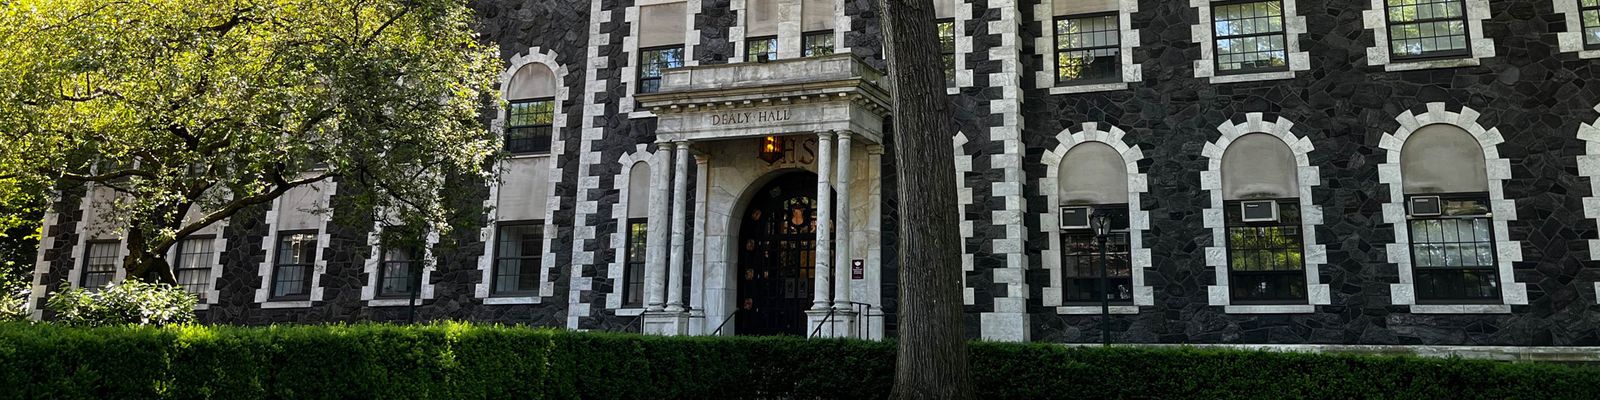 Dealy Hall entrance on Rose Hill campus